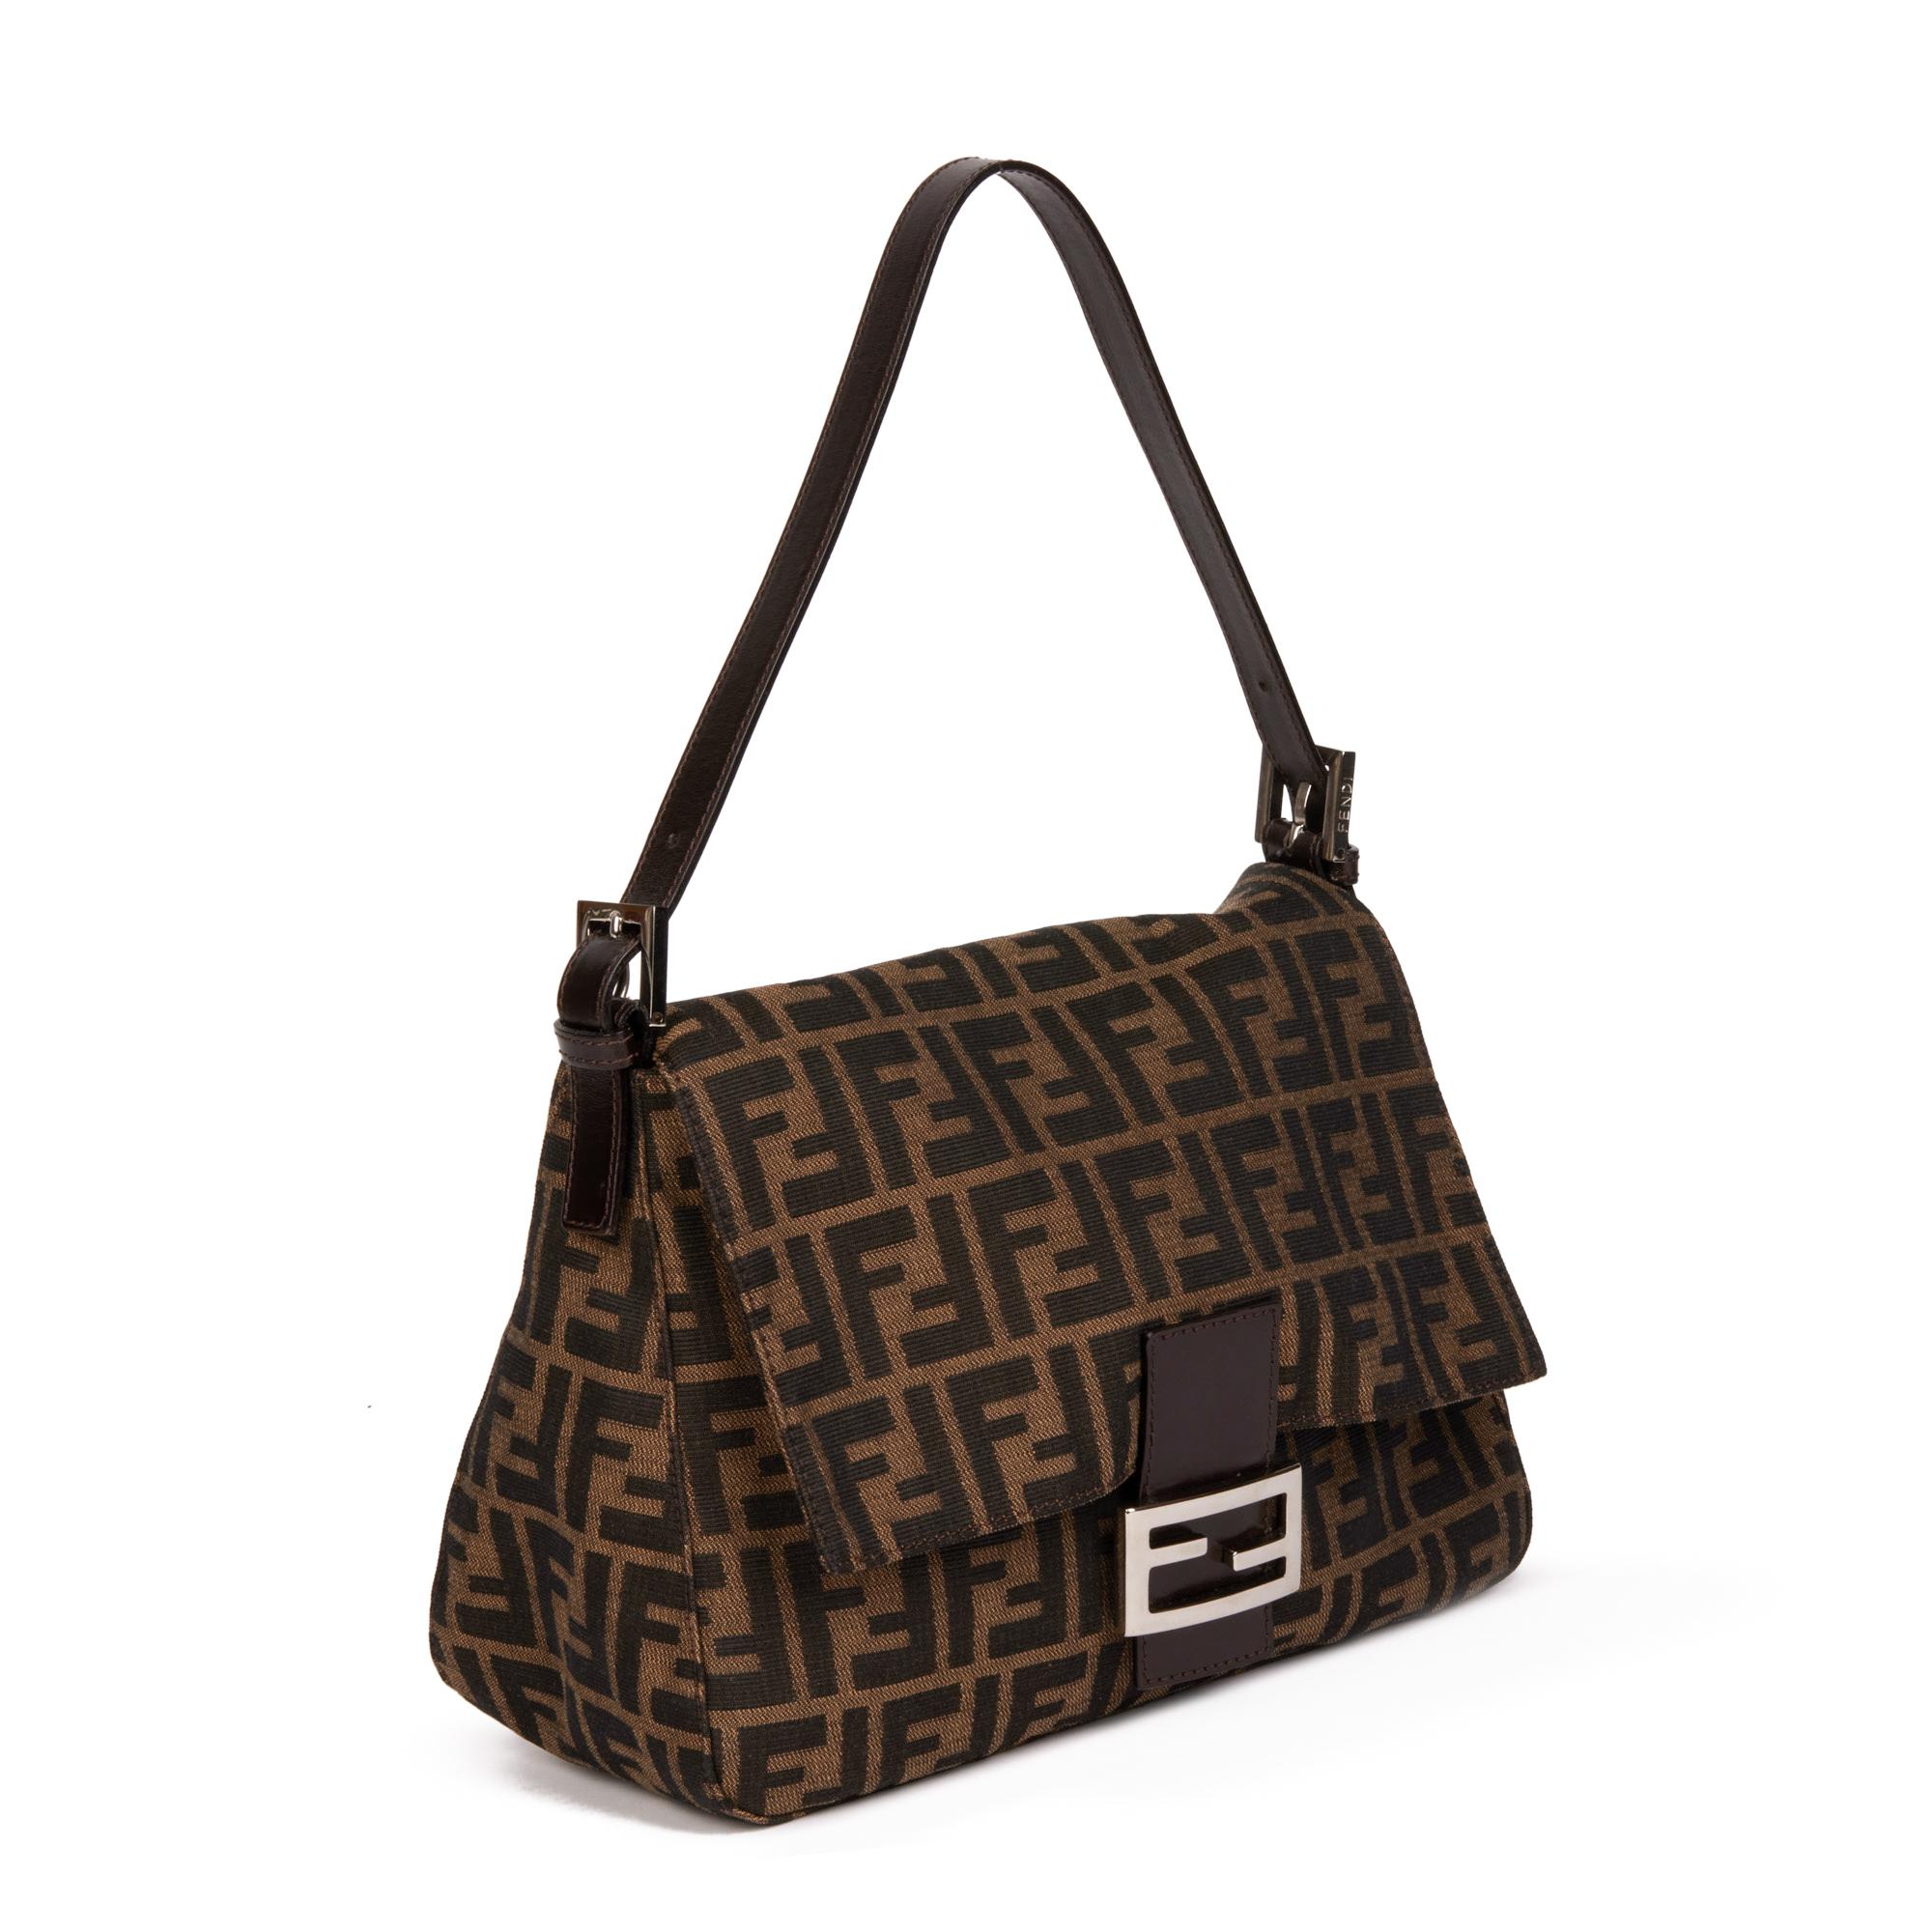 FENDI
Brown Zucca Canvas & Calfskin Leather Vintage Mama Baguette

Xupes Reference: HB4296
Serial Number: 2308-26325-008
Age (Circa): 2000
Accompanied By: Fendi Dust Bag
Authenticity Details: Date Stamp (Made in Italy)
Gender: Ladies
Type: Shoulder,